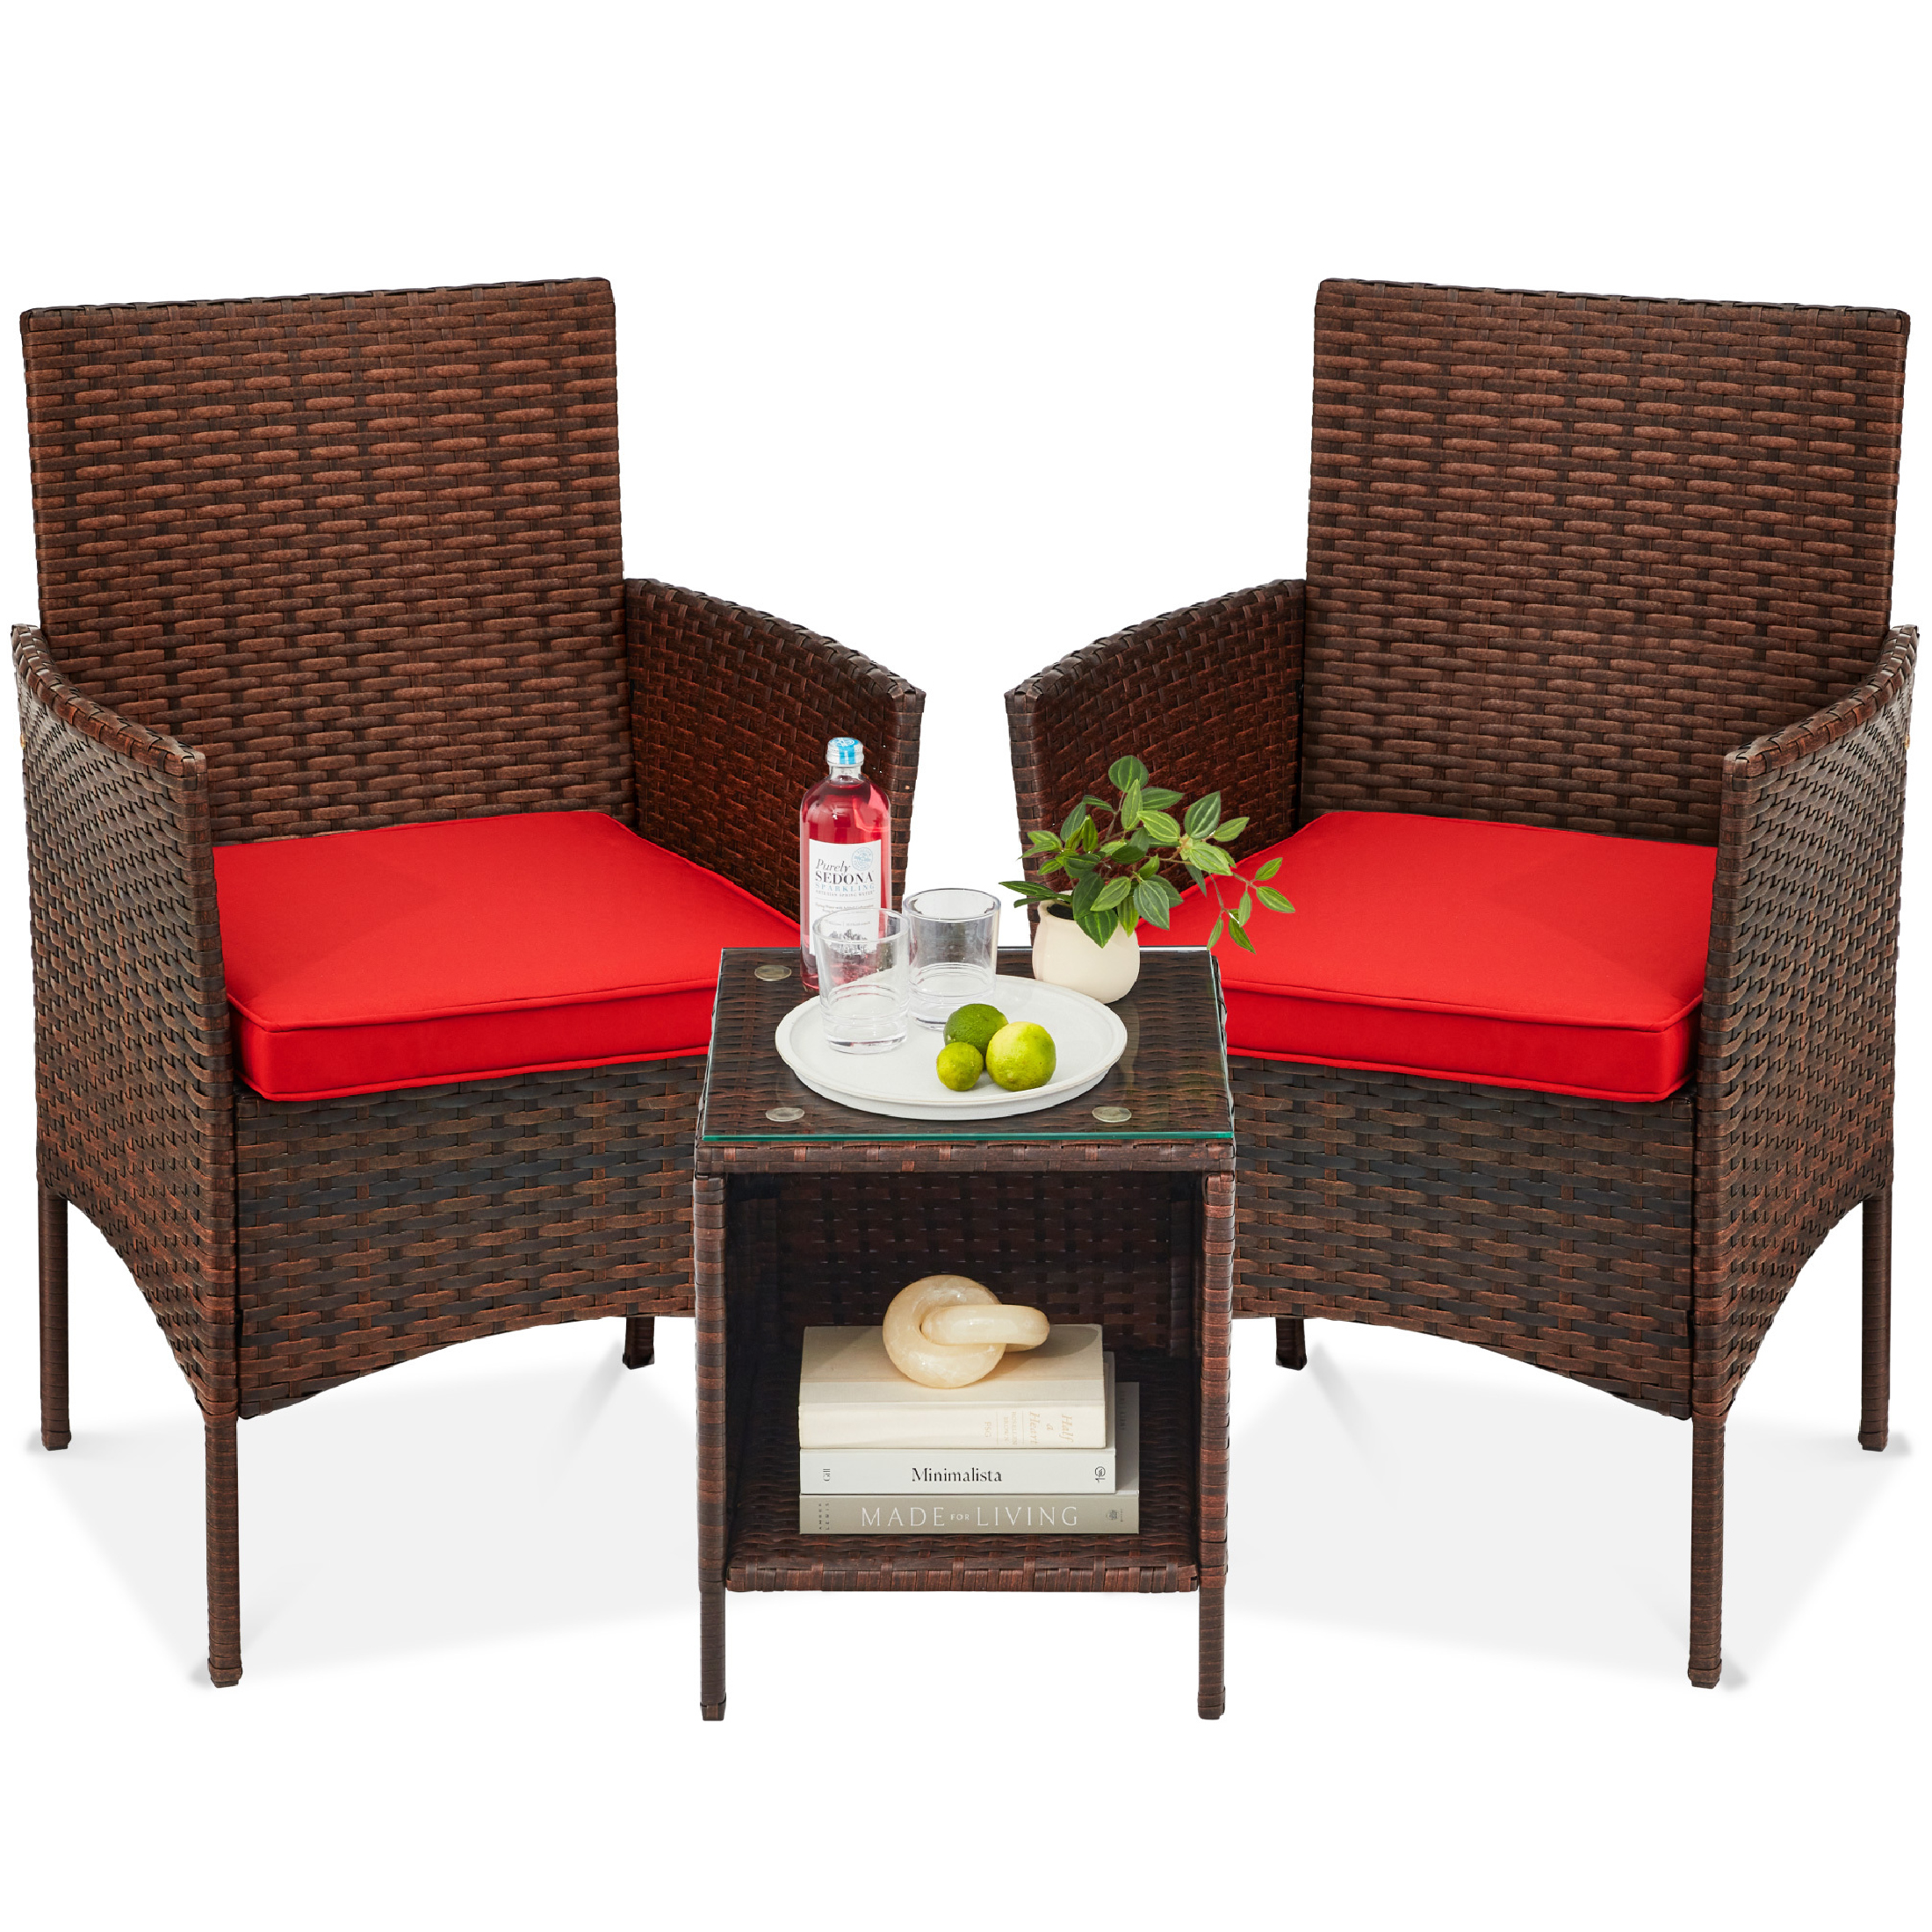 Best Choice Products 3-Piece Outdoor Wicker Conversation Patio Bistro Set, w/ 2 Chairs, Table - Brown/Red - image 1 of 8